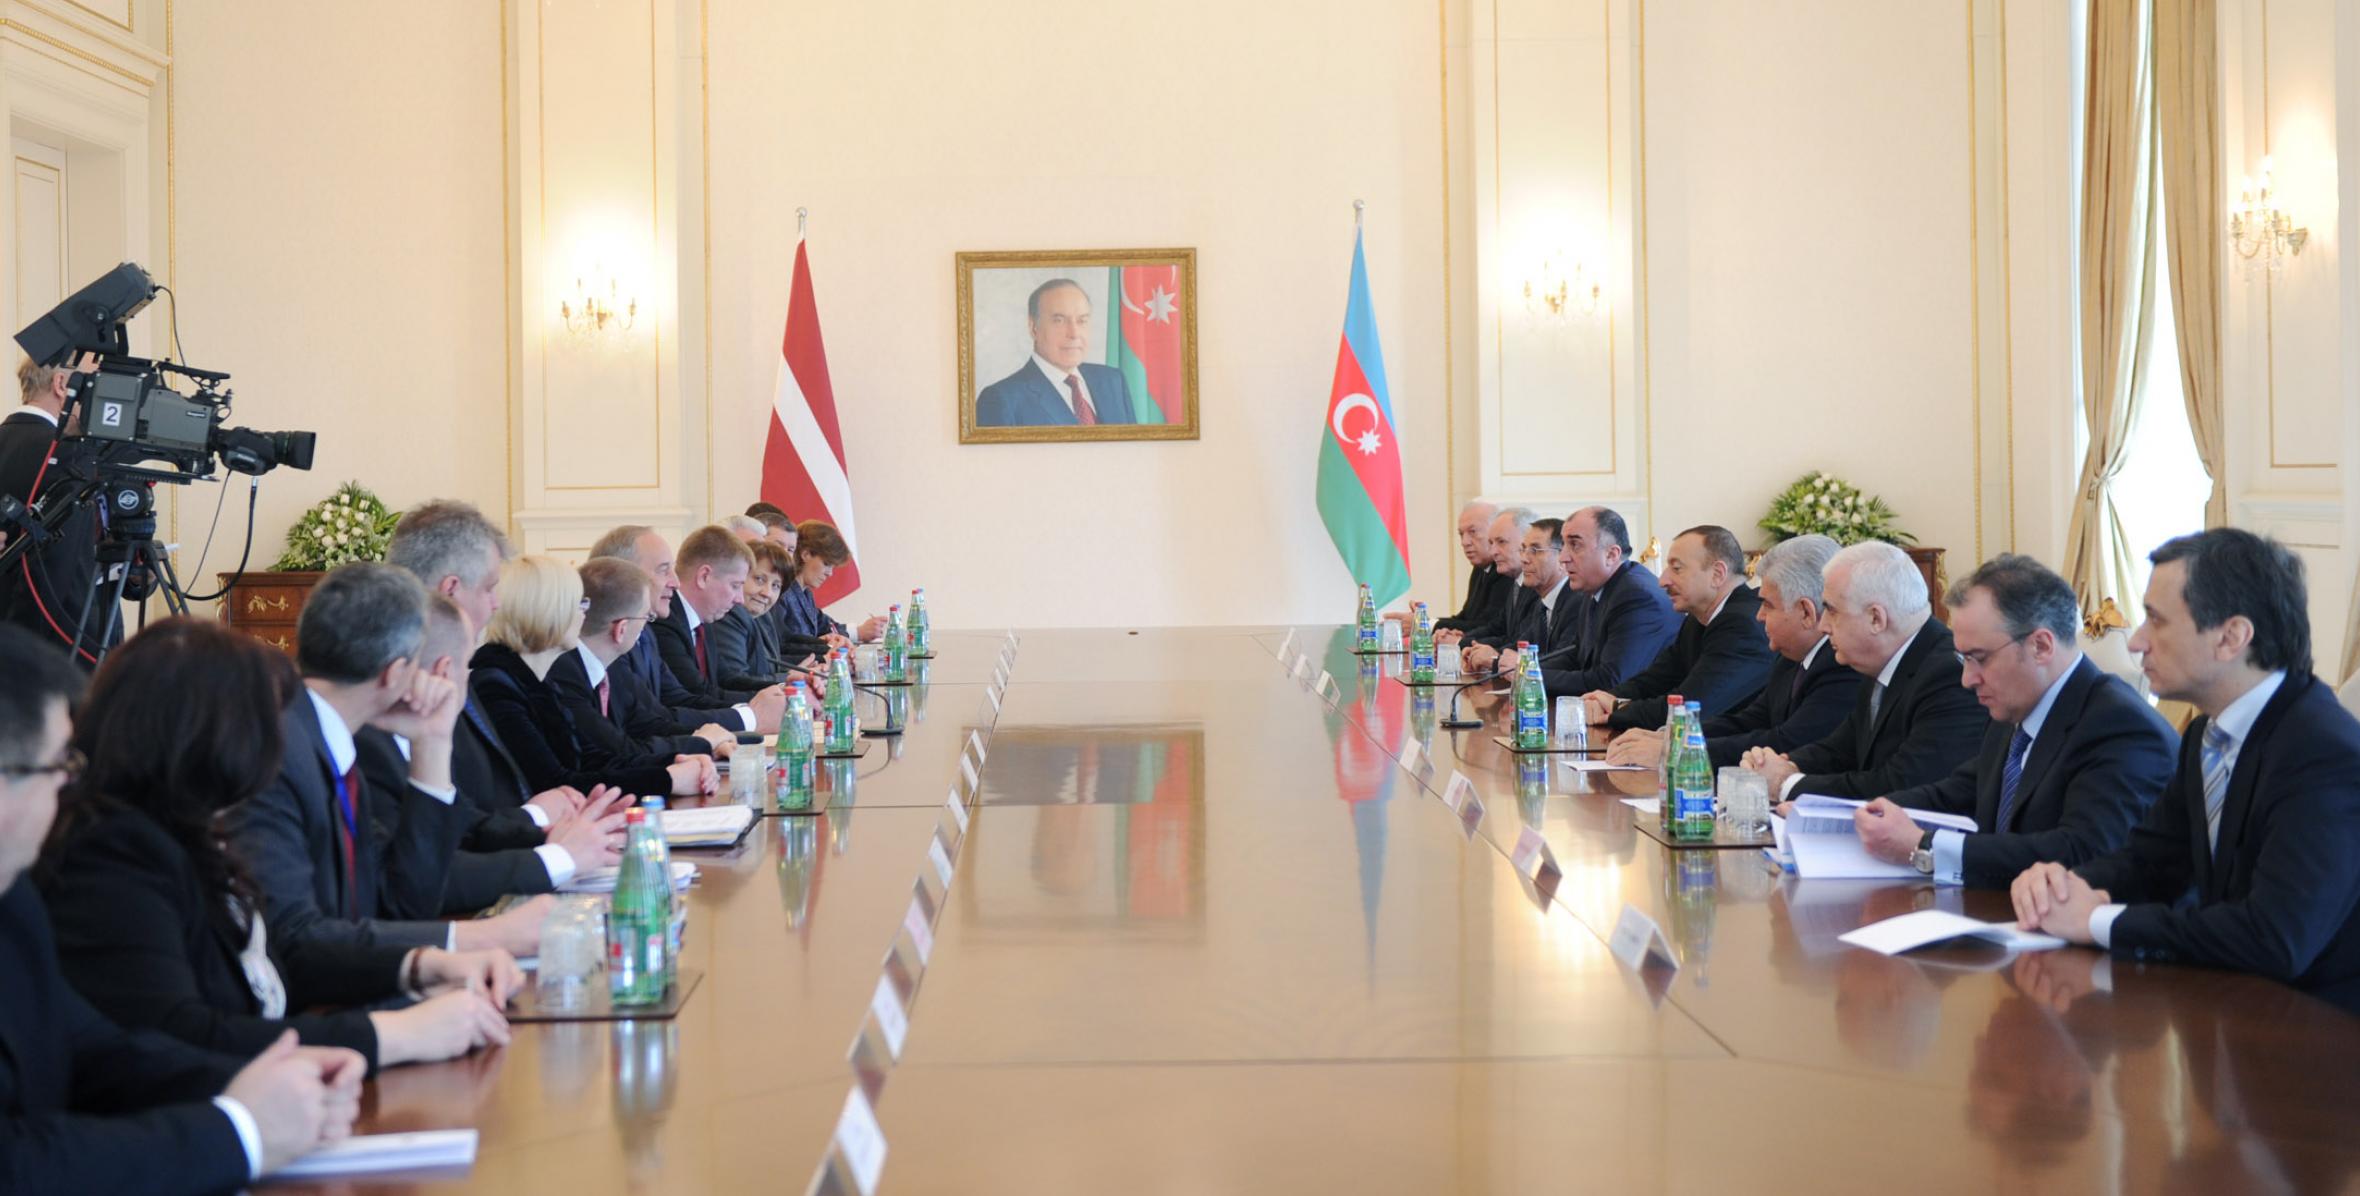 Ilham Aliyev met with President of the Republic of Latvia AndrisBerzins in an expanded format with the participation of delegations